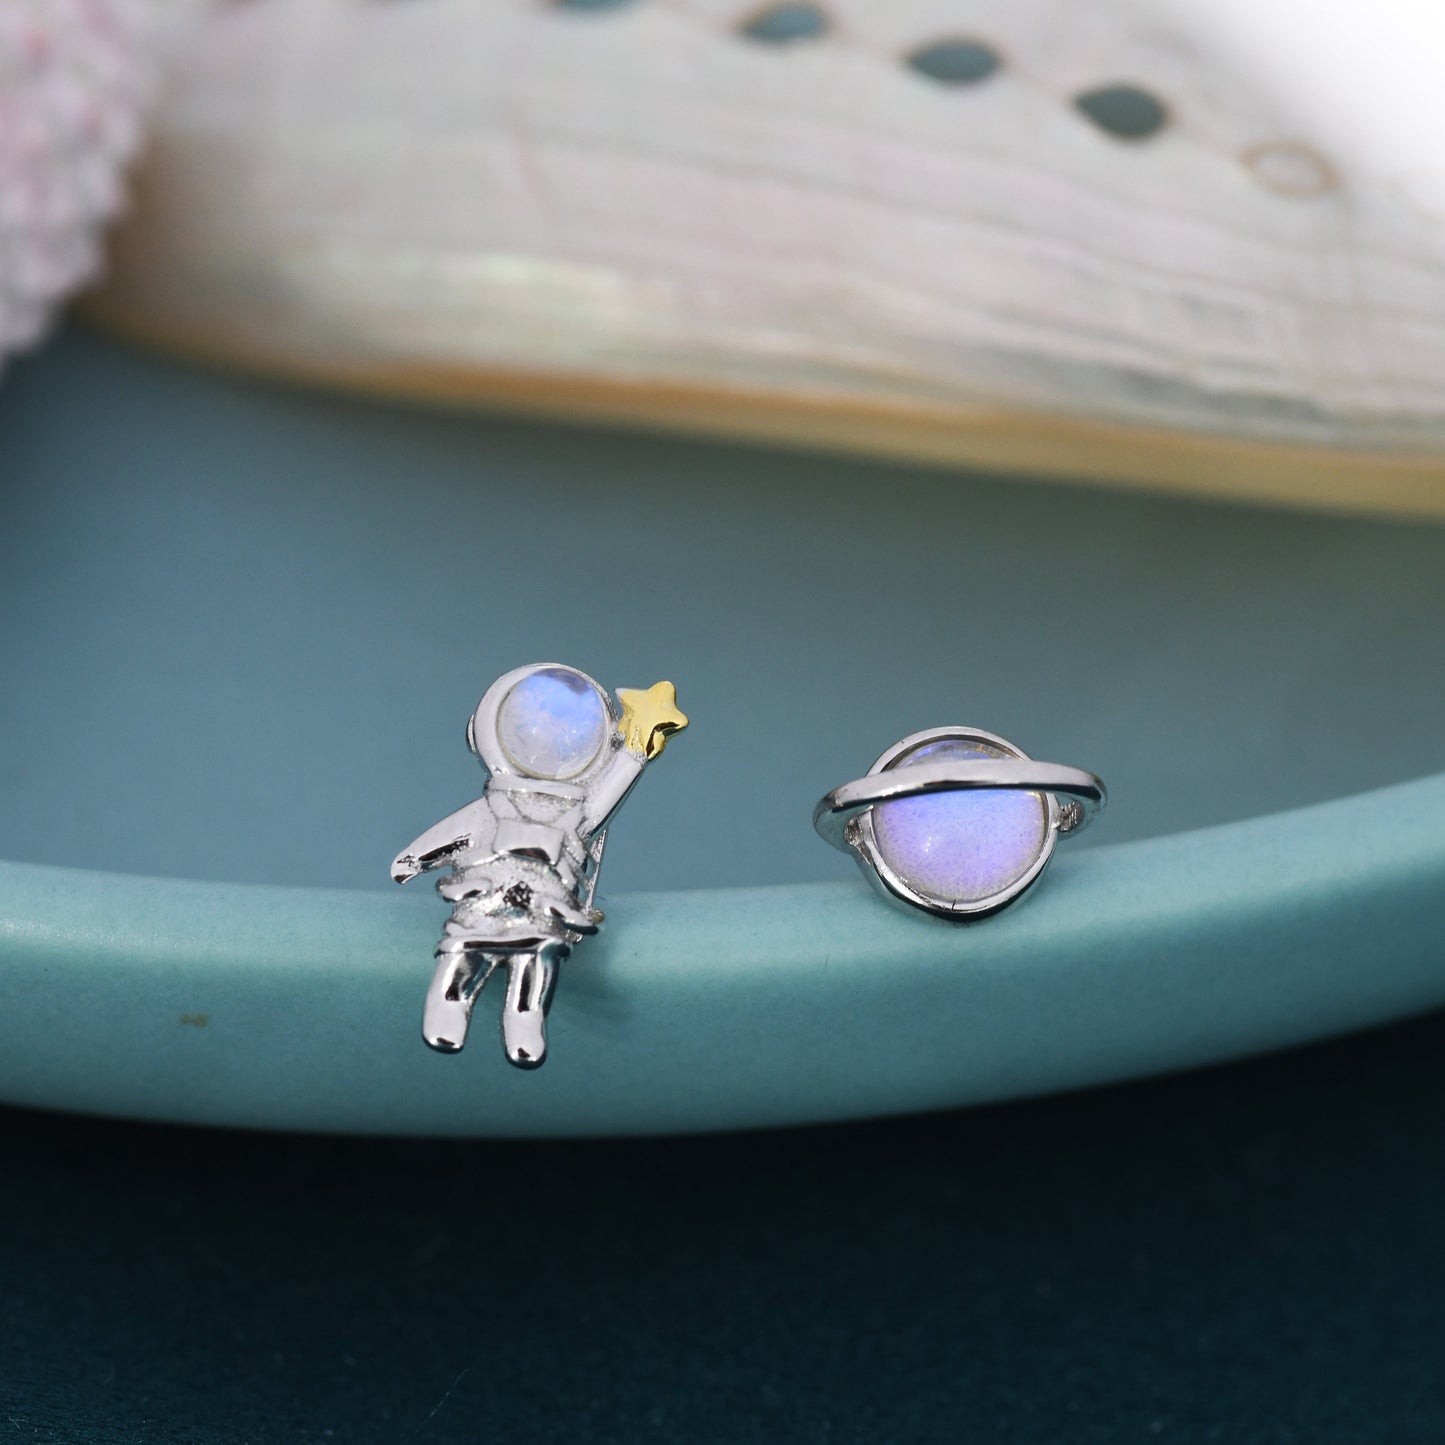 Mismatched Astronaut and Planet  Stud Earrings in Sterling Silver, Asymmetric Planet and Spaceman Earrings with Moonstone, Cute and Fun